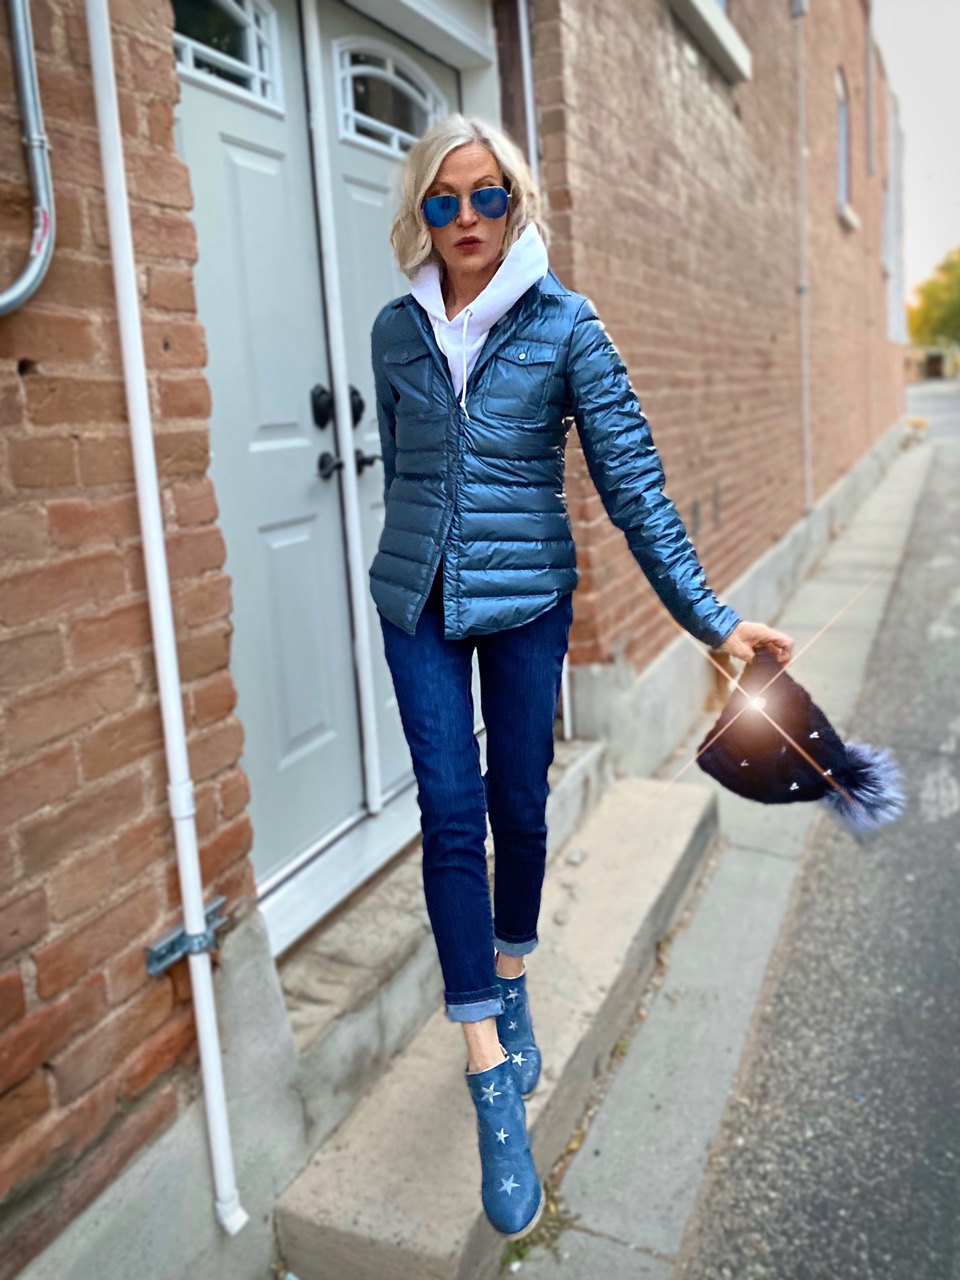 Lifestyle Influencer, Jamie Lewinger of More Than Turquoise wearing blue harrow royale down shirt from Cotes of London 